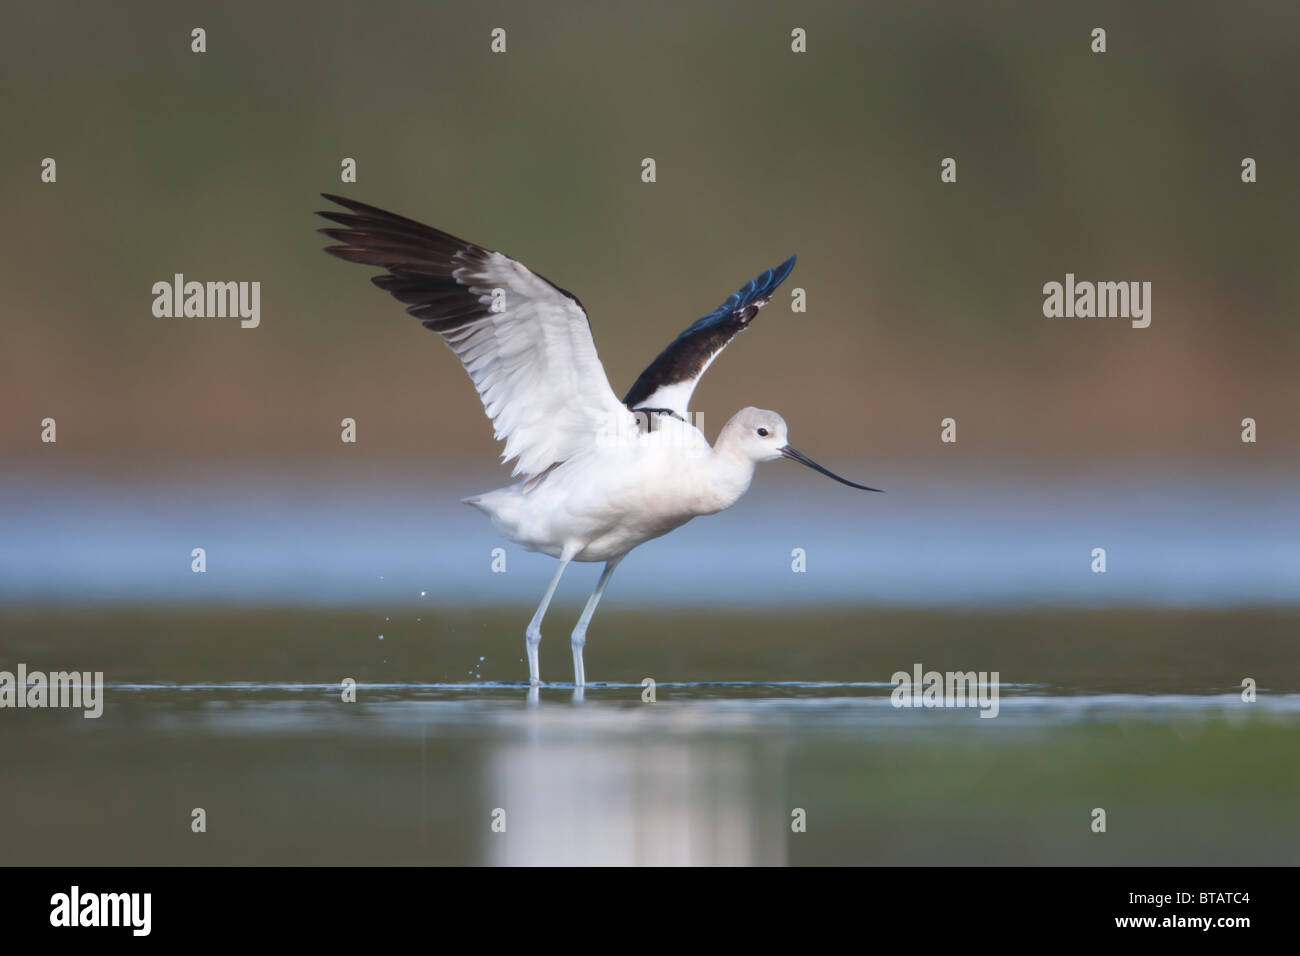 American Avocet (Recurvirostra americana) flapping its wings, East Pond, Jamaica Bay Wildlife Refuge Stock Photo